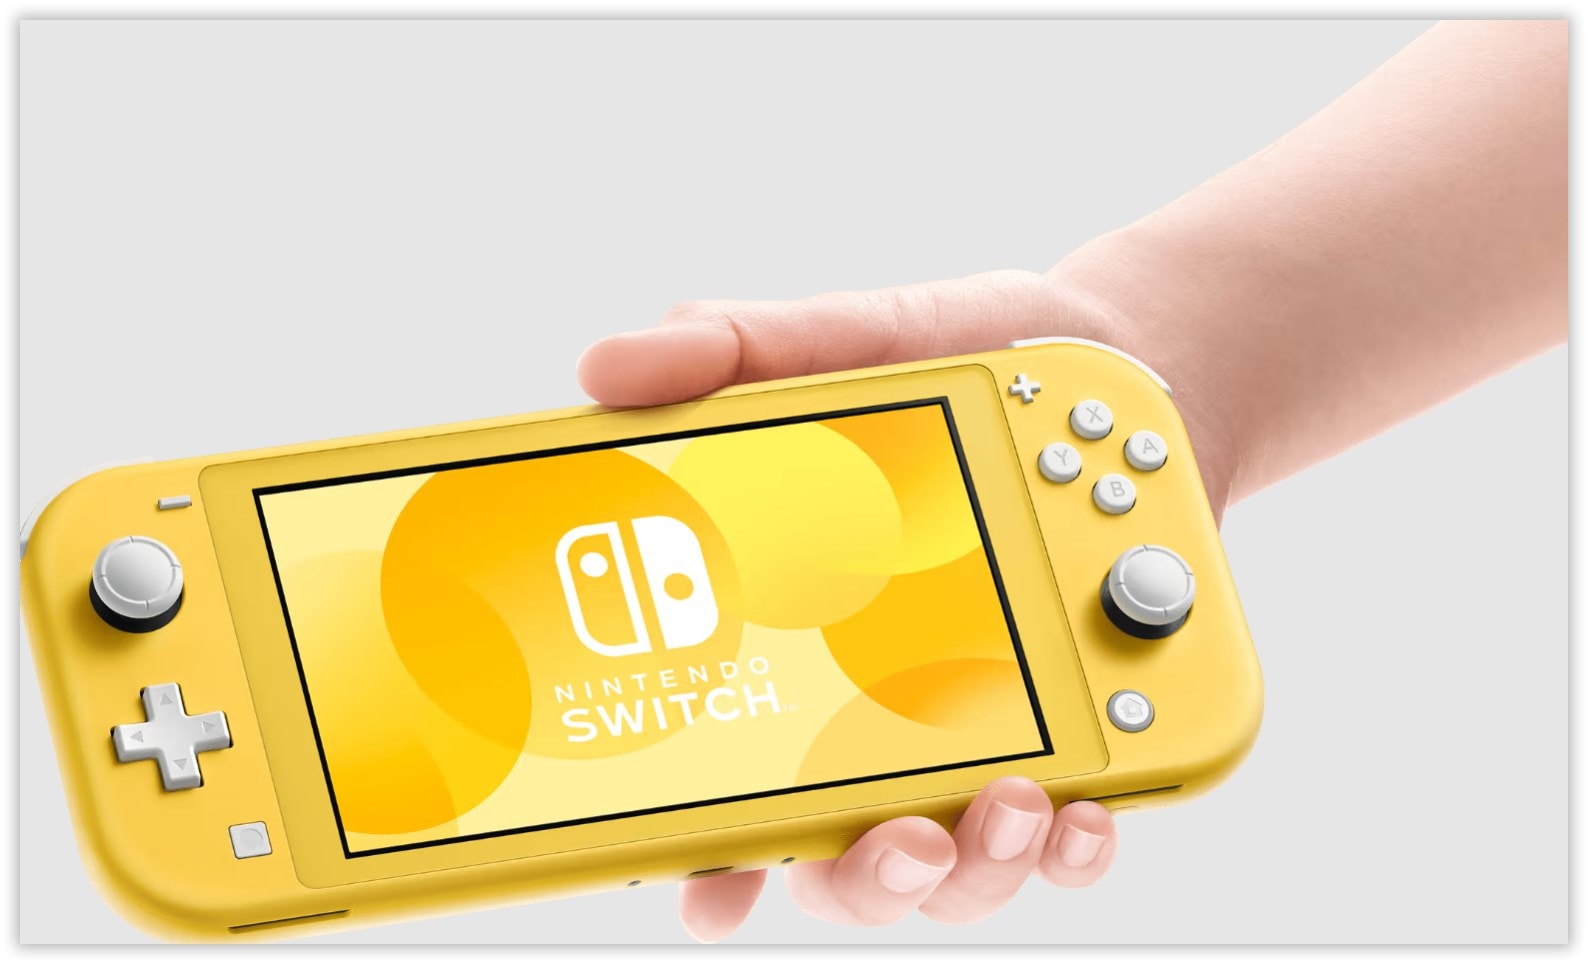 Complete Nintendo Switch Lite Review: Why is it Cheaper than Other Gaming Handhelds in Australia?